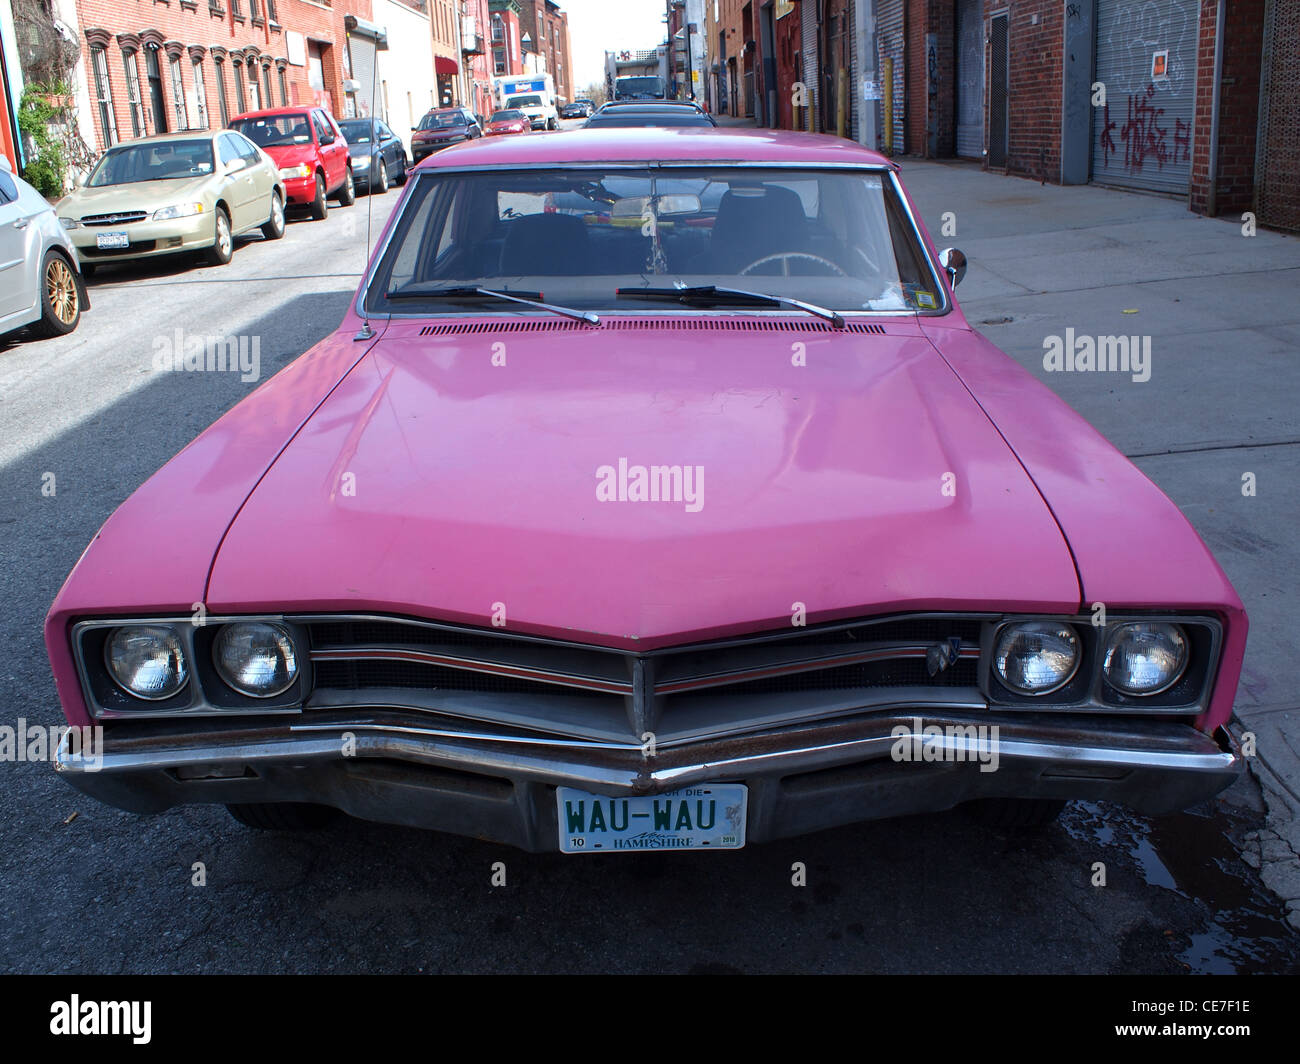 Pink Cadillac automobile, Brooklyn, New York, owned by the Wau-Wau dance troup Stock Photo